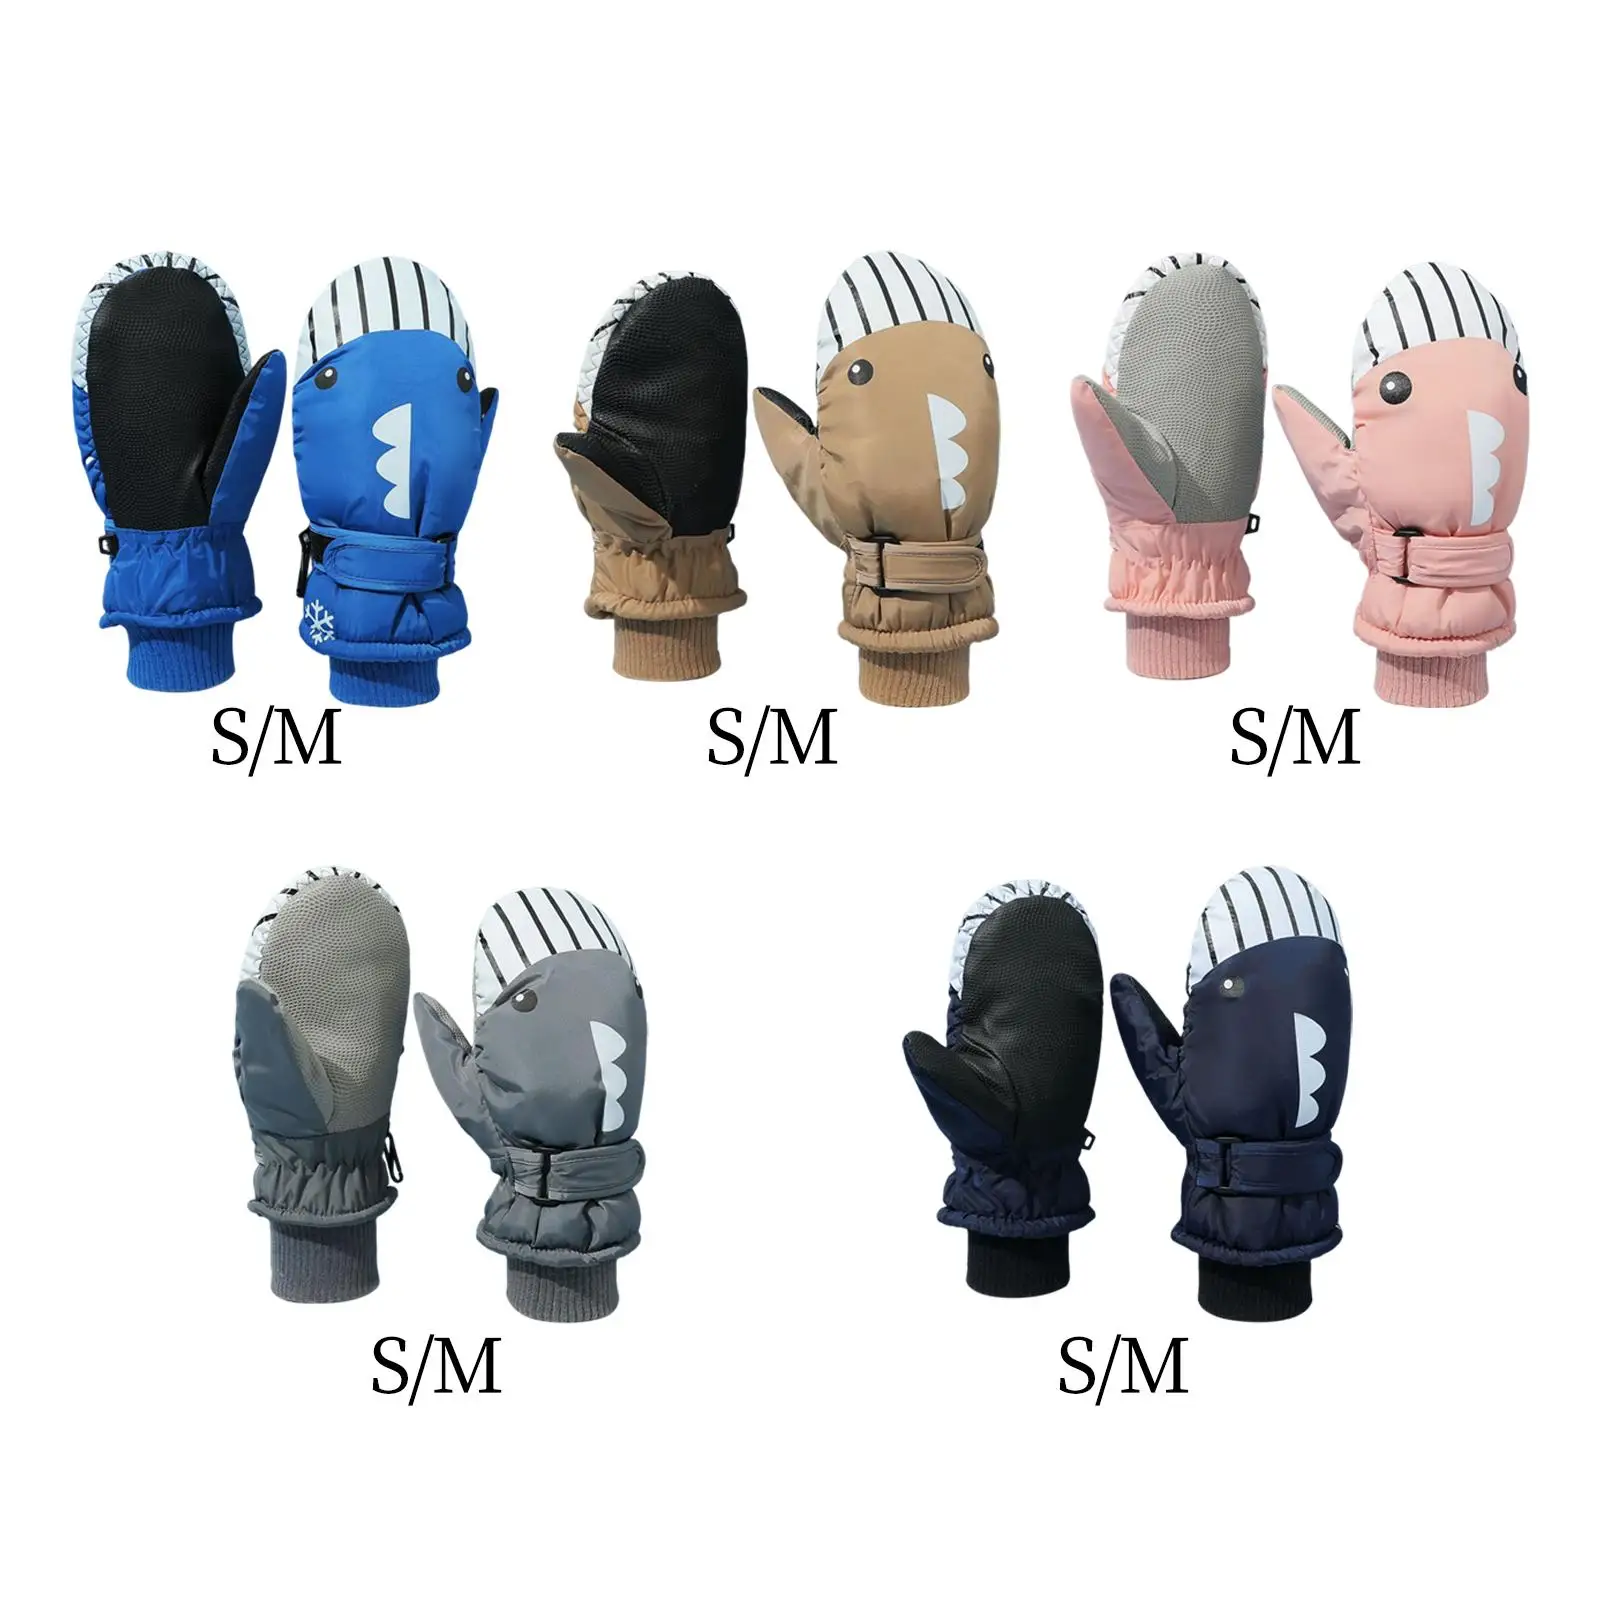 Mittens Adjustable Practical Comfortable Thickened Connecting Lock Insulated Snow Ski Gloves for Boys Girls Children Outdoor